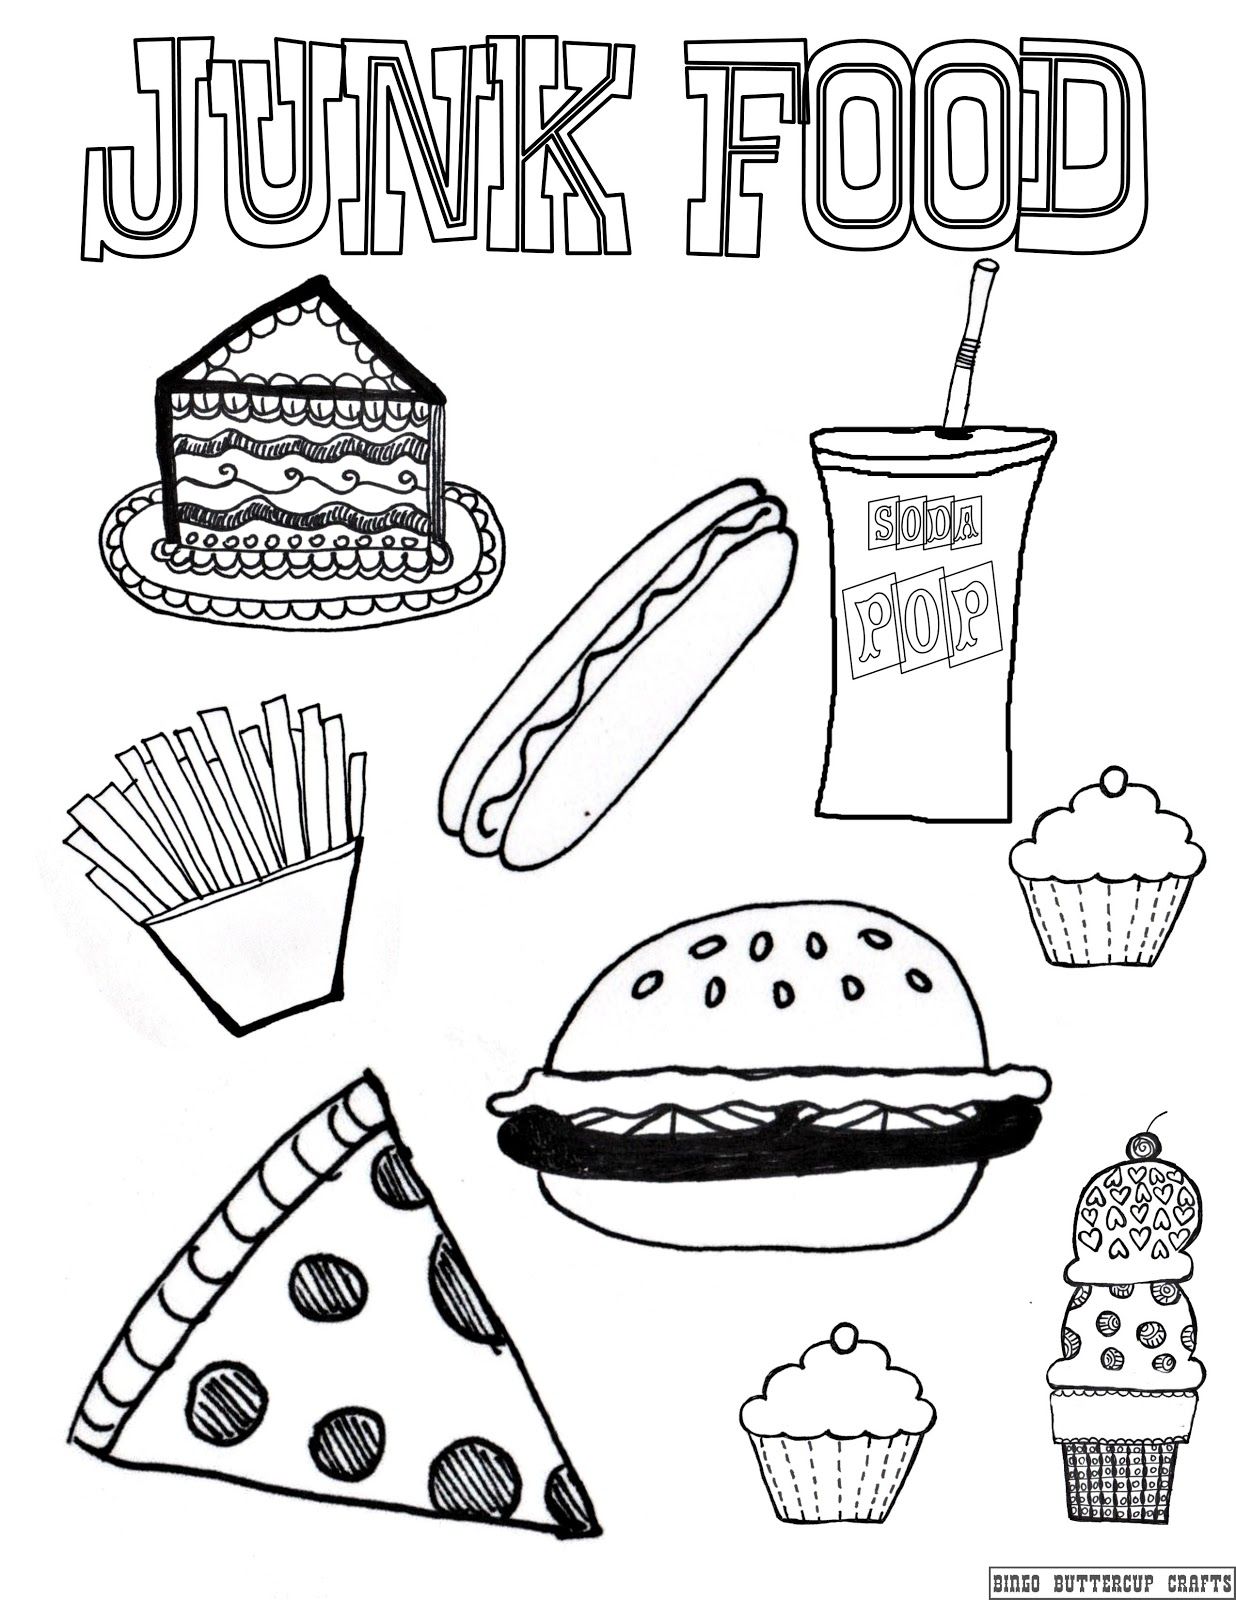 american junk food coloring pages cute. thanksgiving food coloring ...